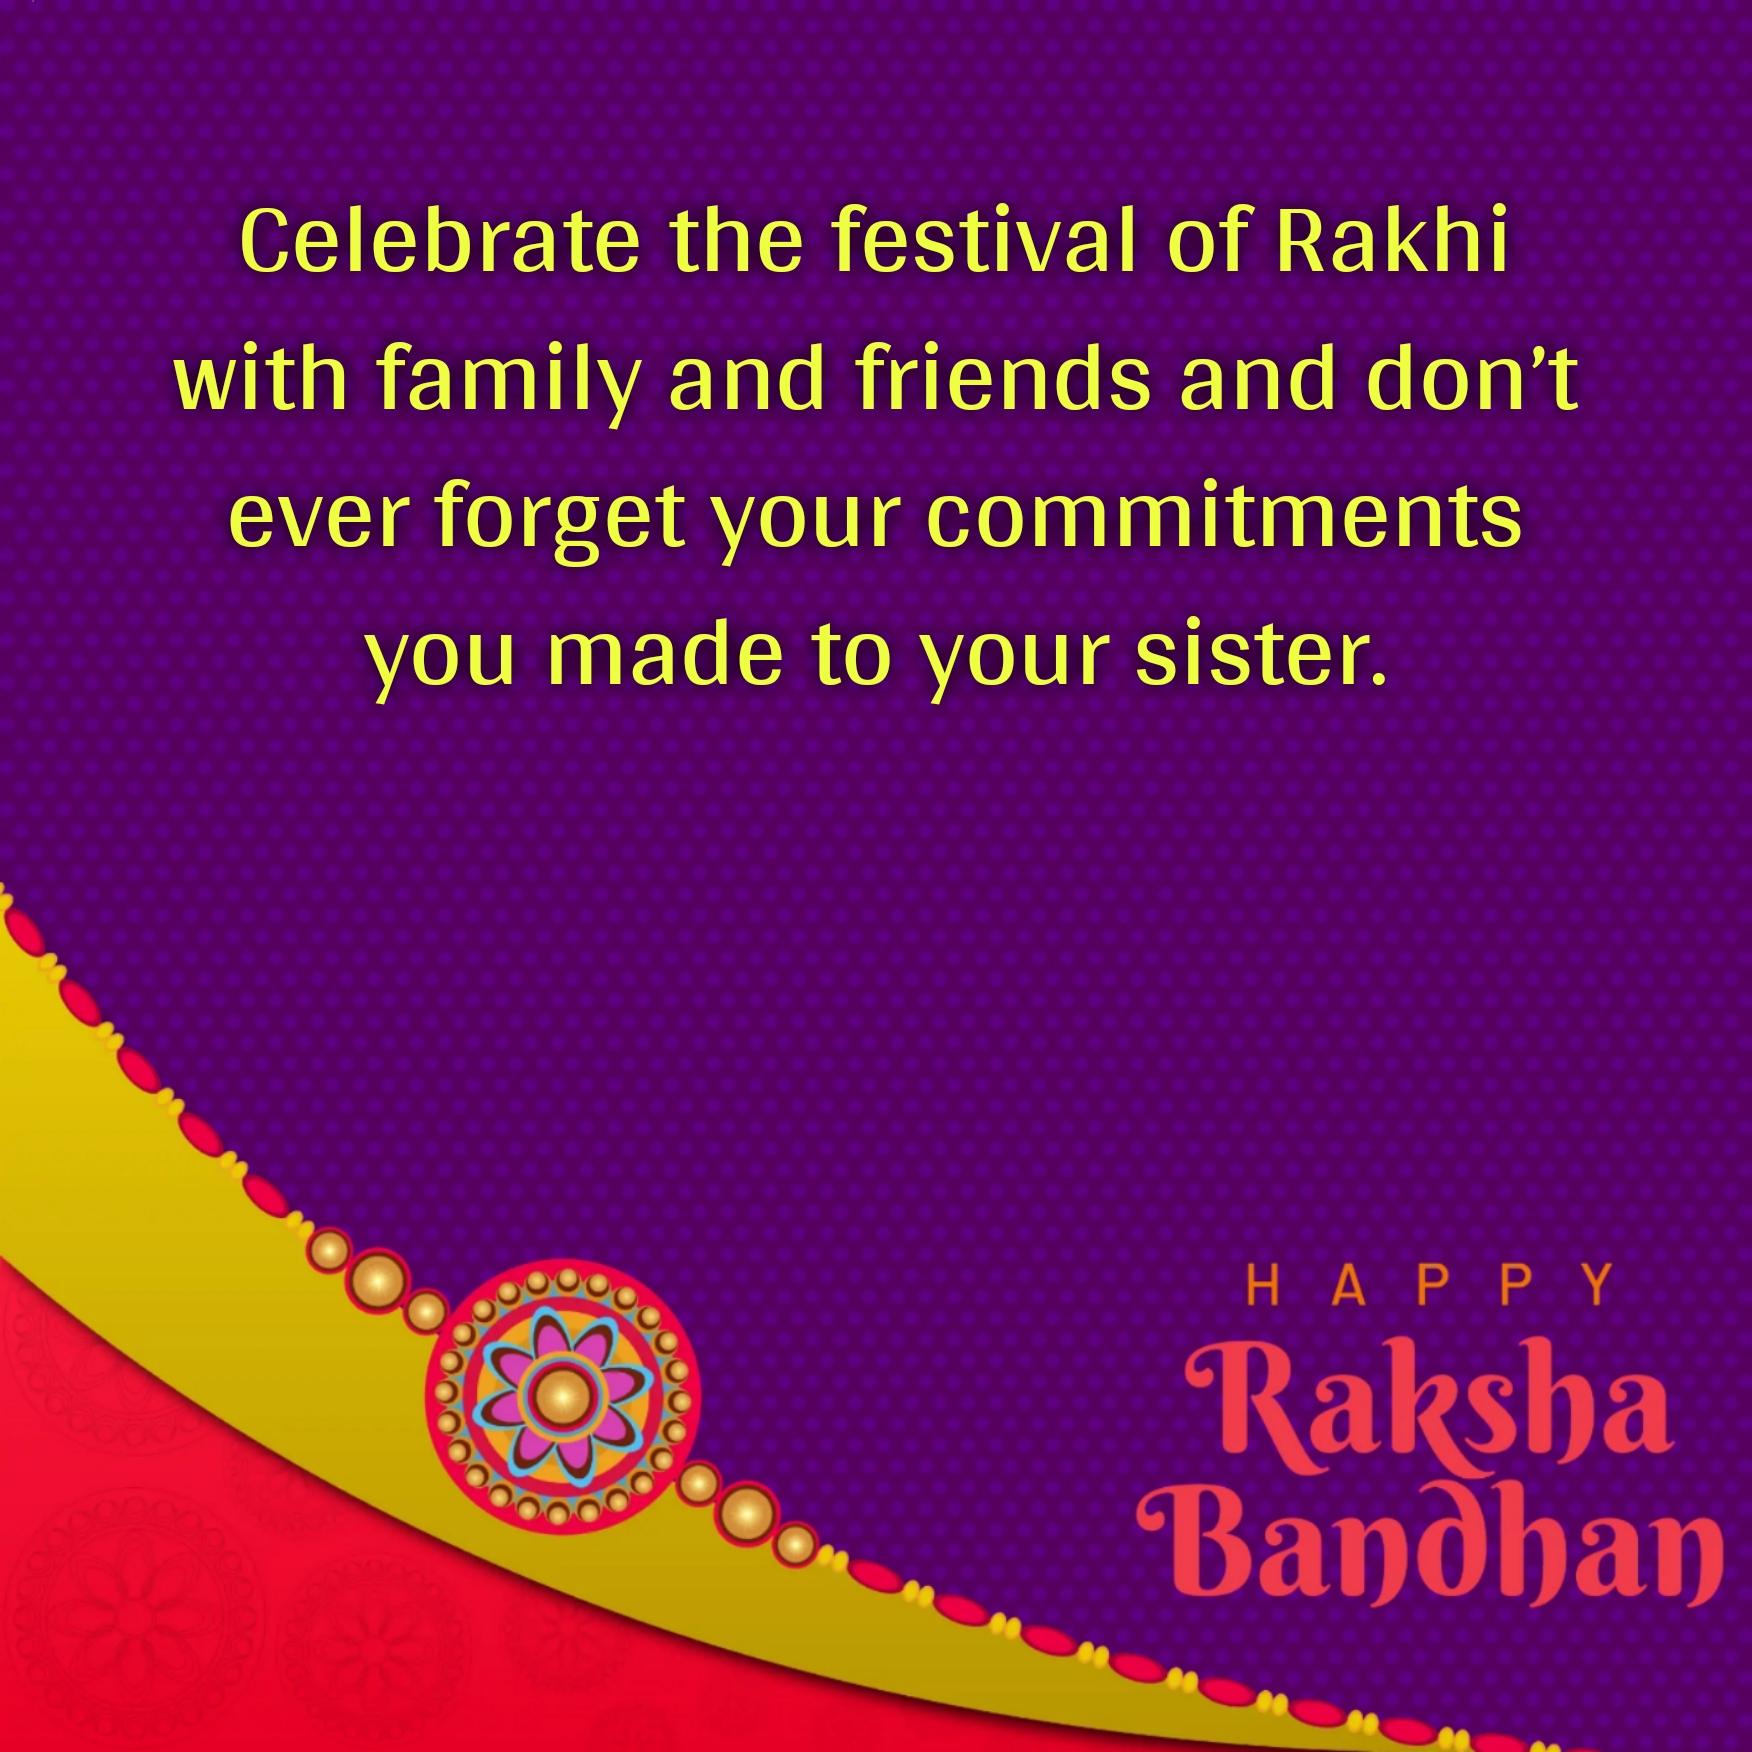 Celebrate the festival of Rakhi with family and friends